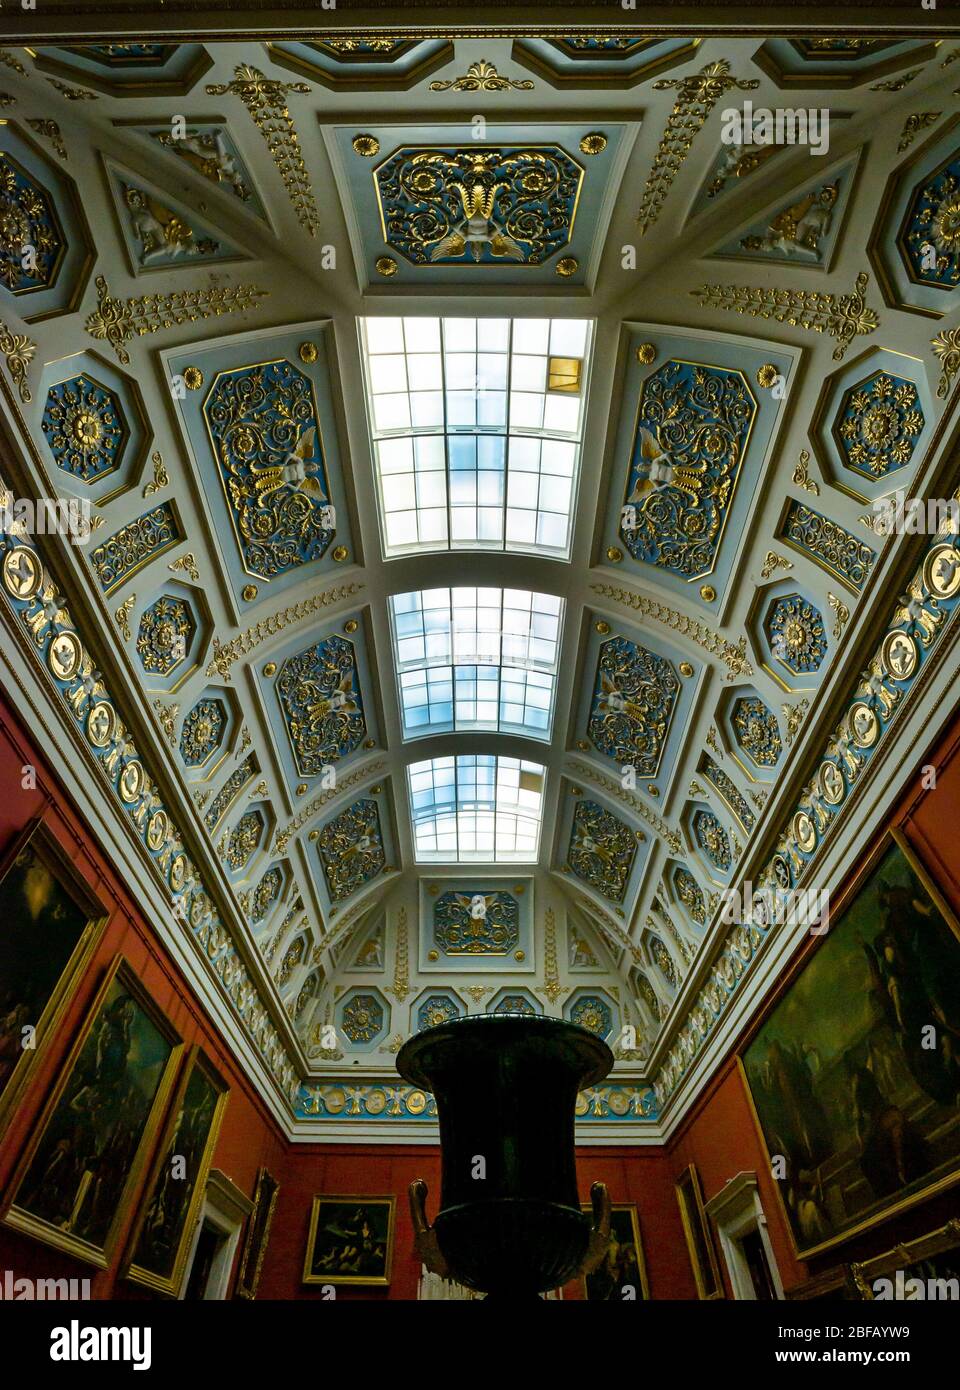 Ceiling of Italian Skylight Room, Hermitage State Museum, St Petersburg, Russian Federation Stock Photo